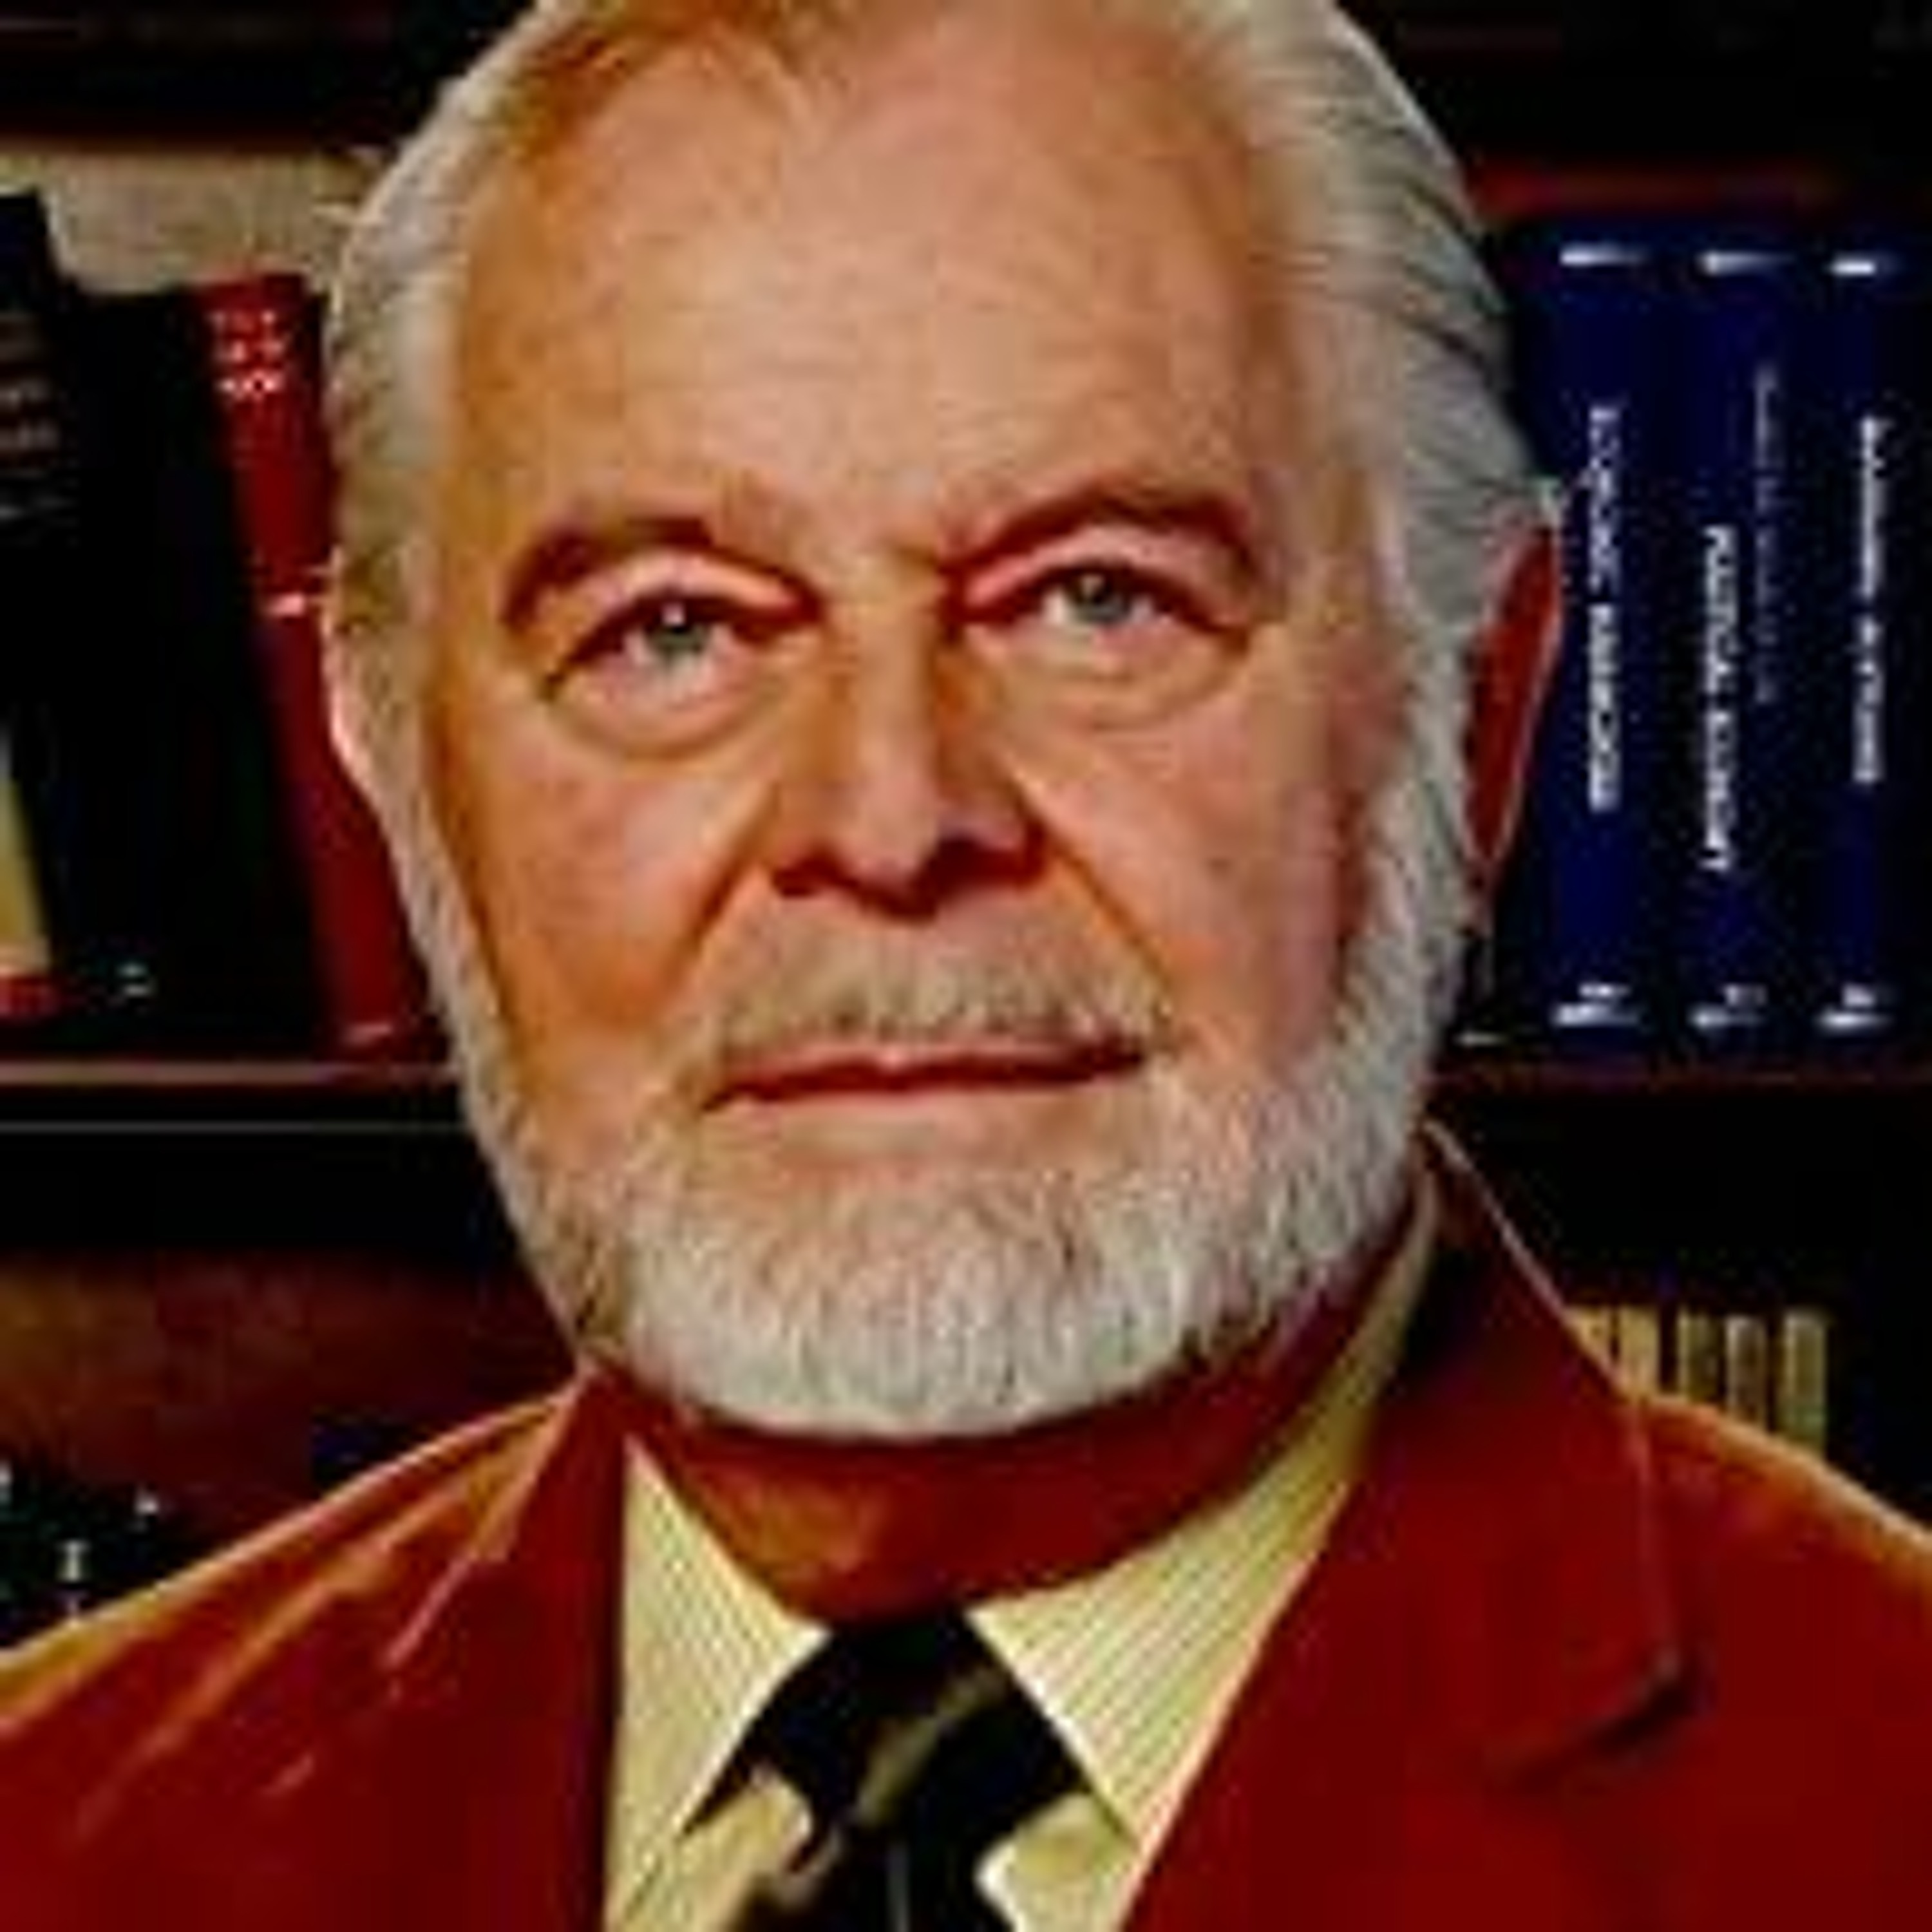 G. Edward Griffin Answers Audience Questions and More!